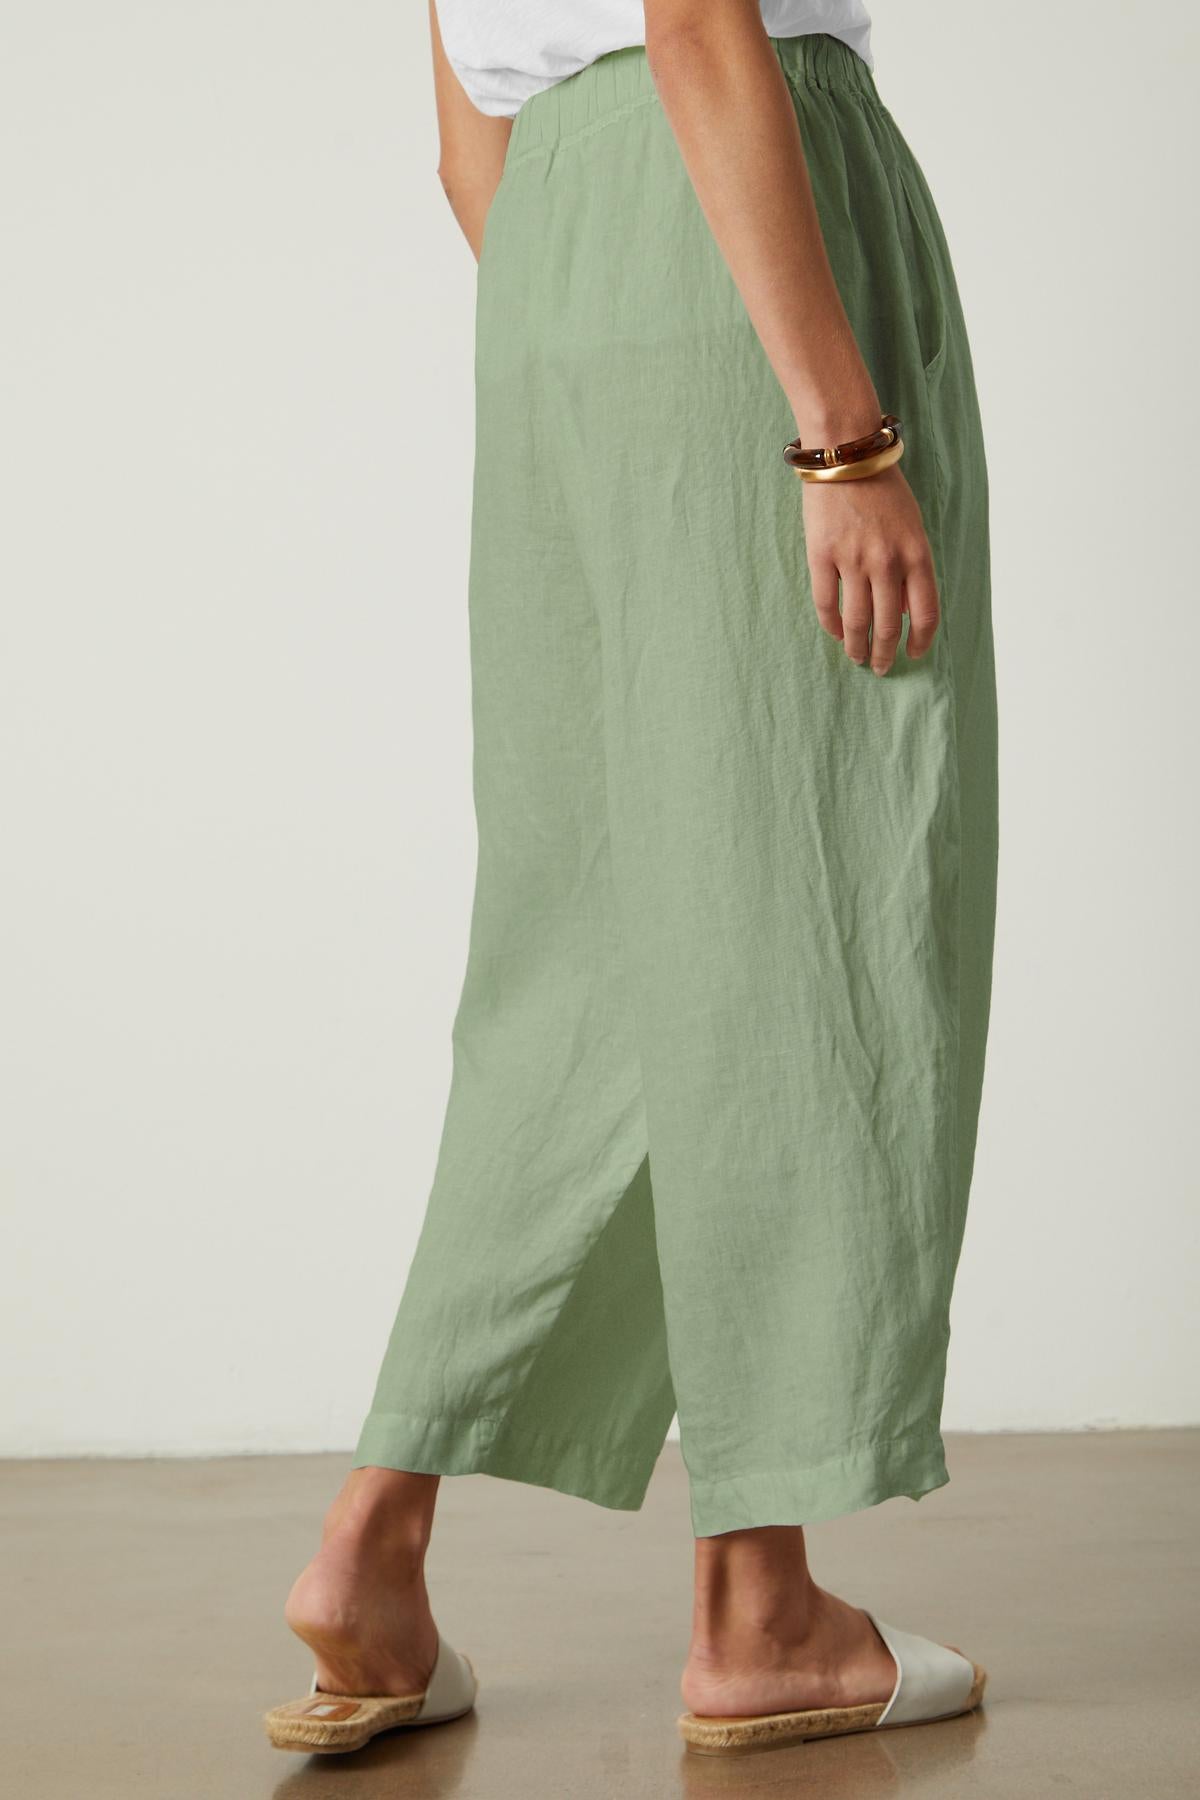 The back view of a woman wearing Velvet by Graham & Spencer's HANNAH LINEN WIDE LEG PANT with cropped legs.-35982790164673